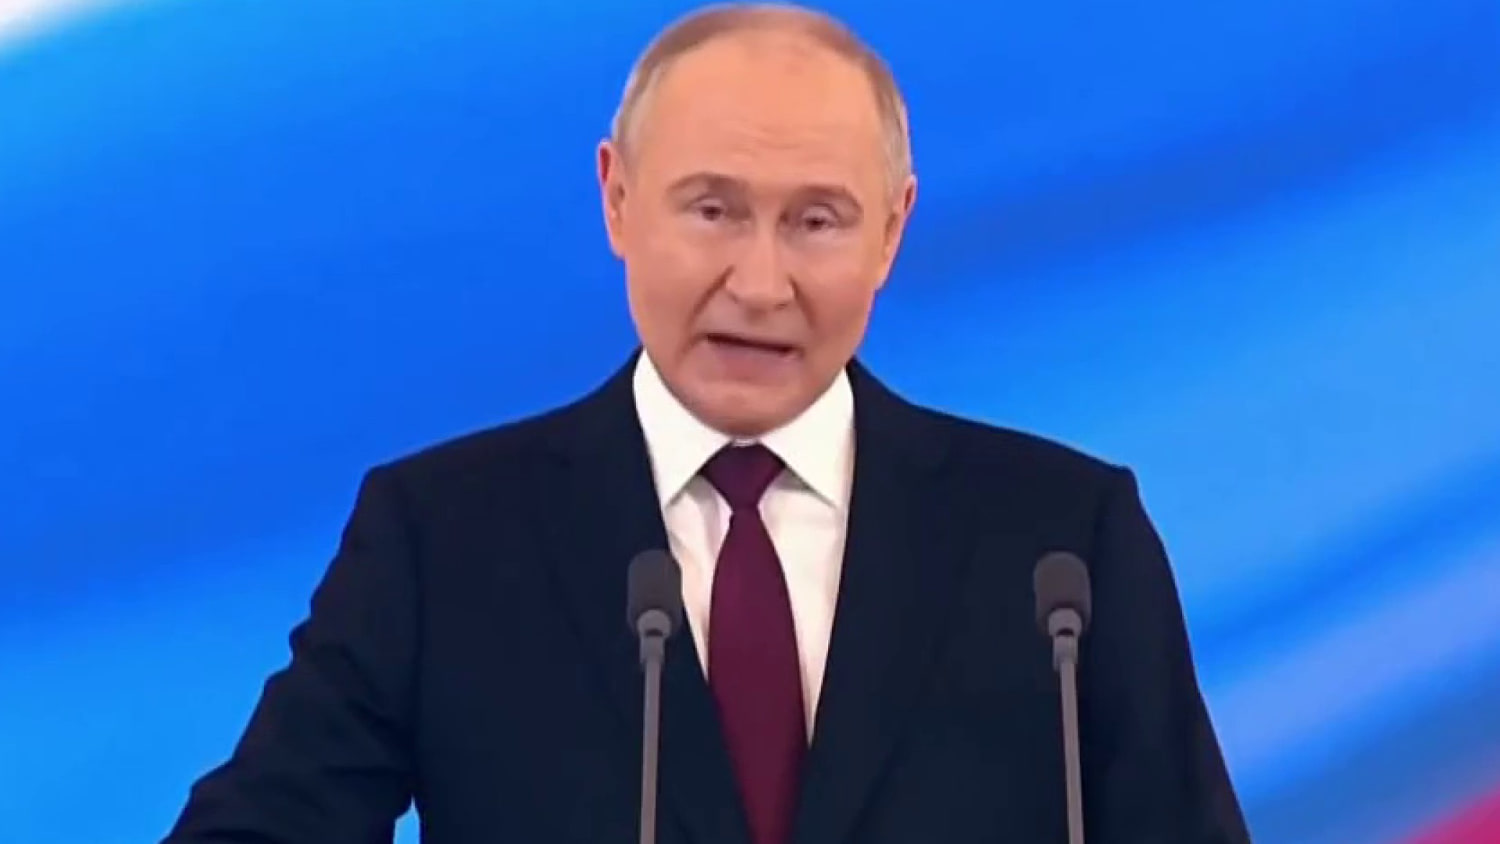 Putin projects ‘wartime image’ of Russia in fifth inaugural address